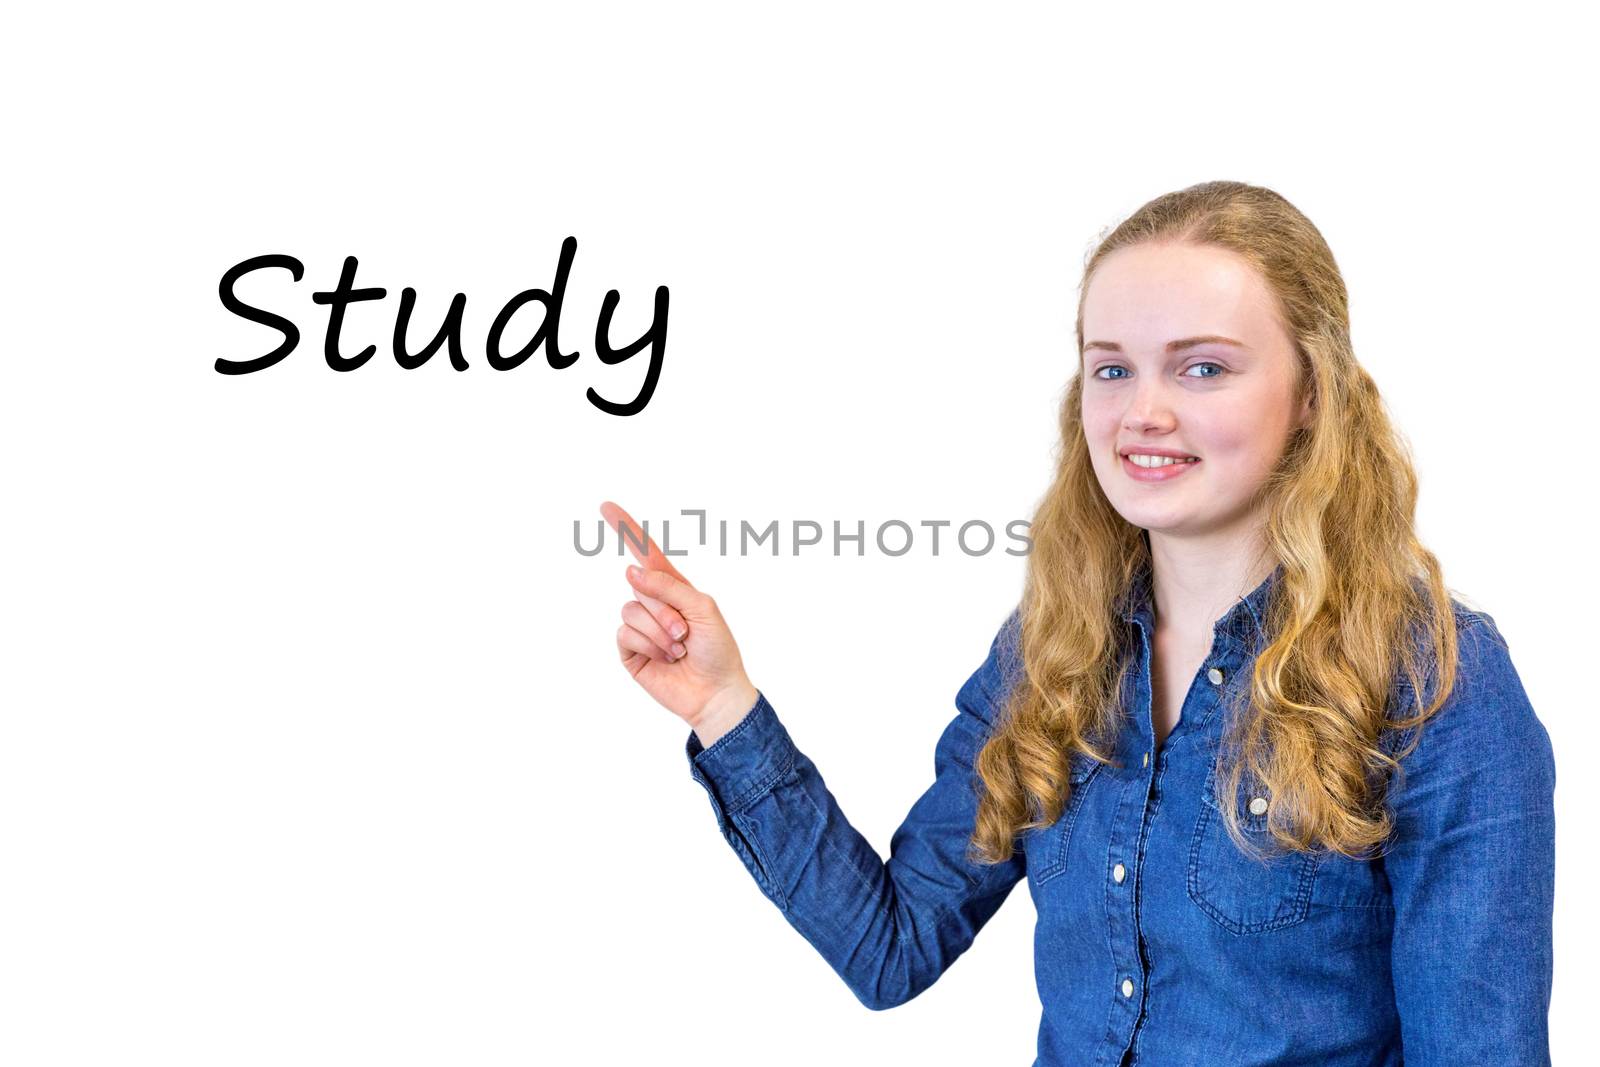 Dutch teenage girl pointing at word Study on white board by BenSchonewille